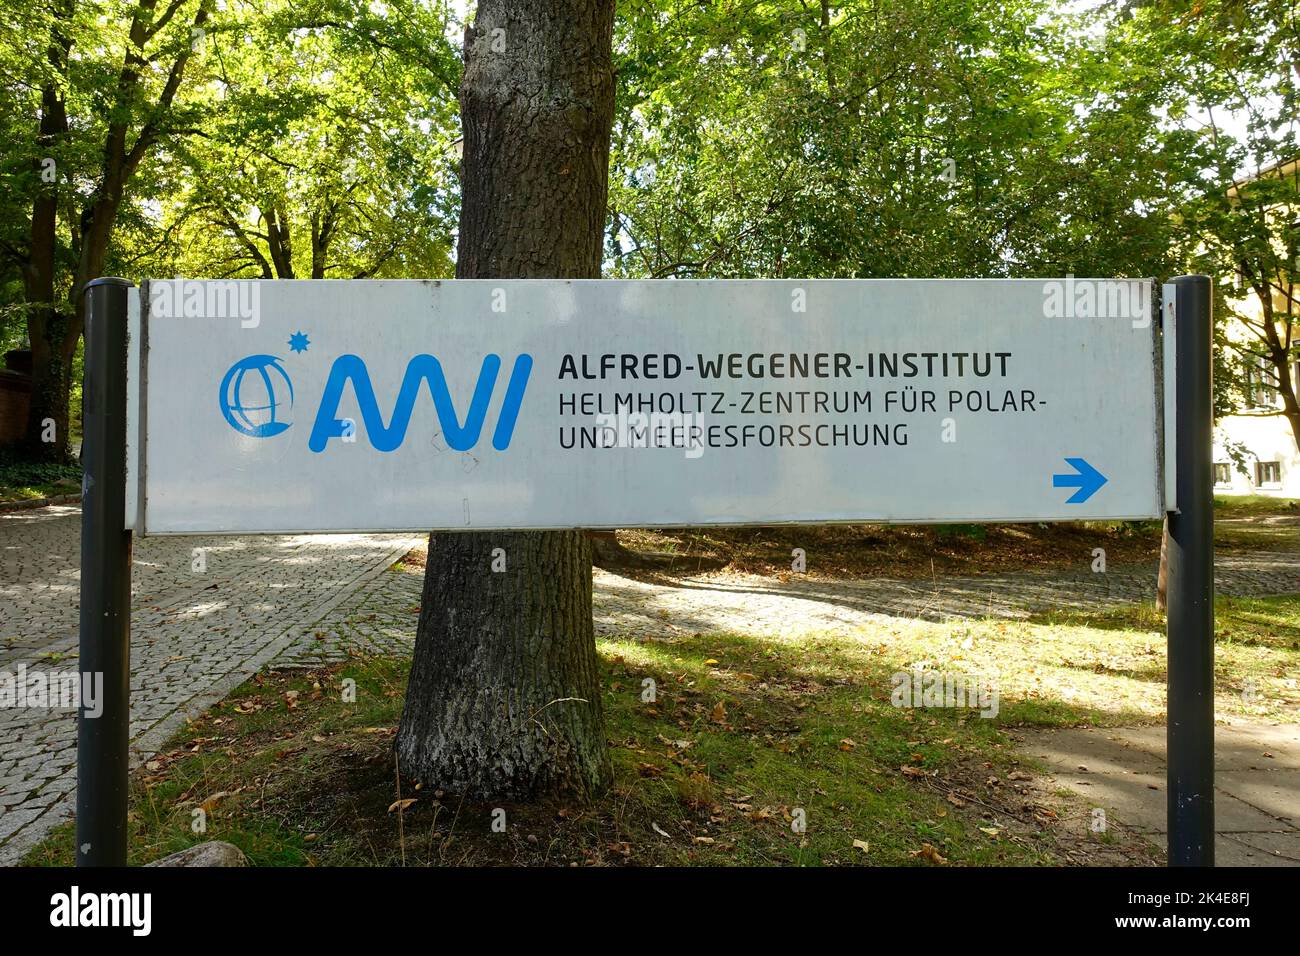 AWI, Alfred Wegener Institute, Helmholtz Centre for Polar and Marine Research Stock Photo